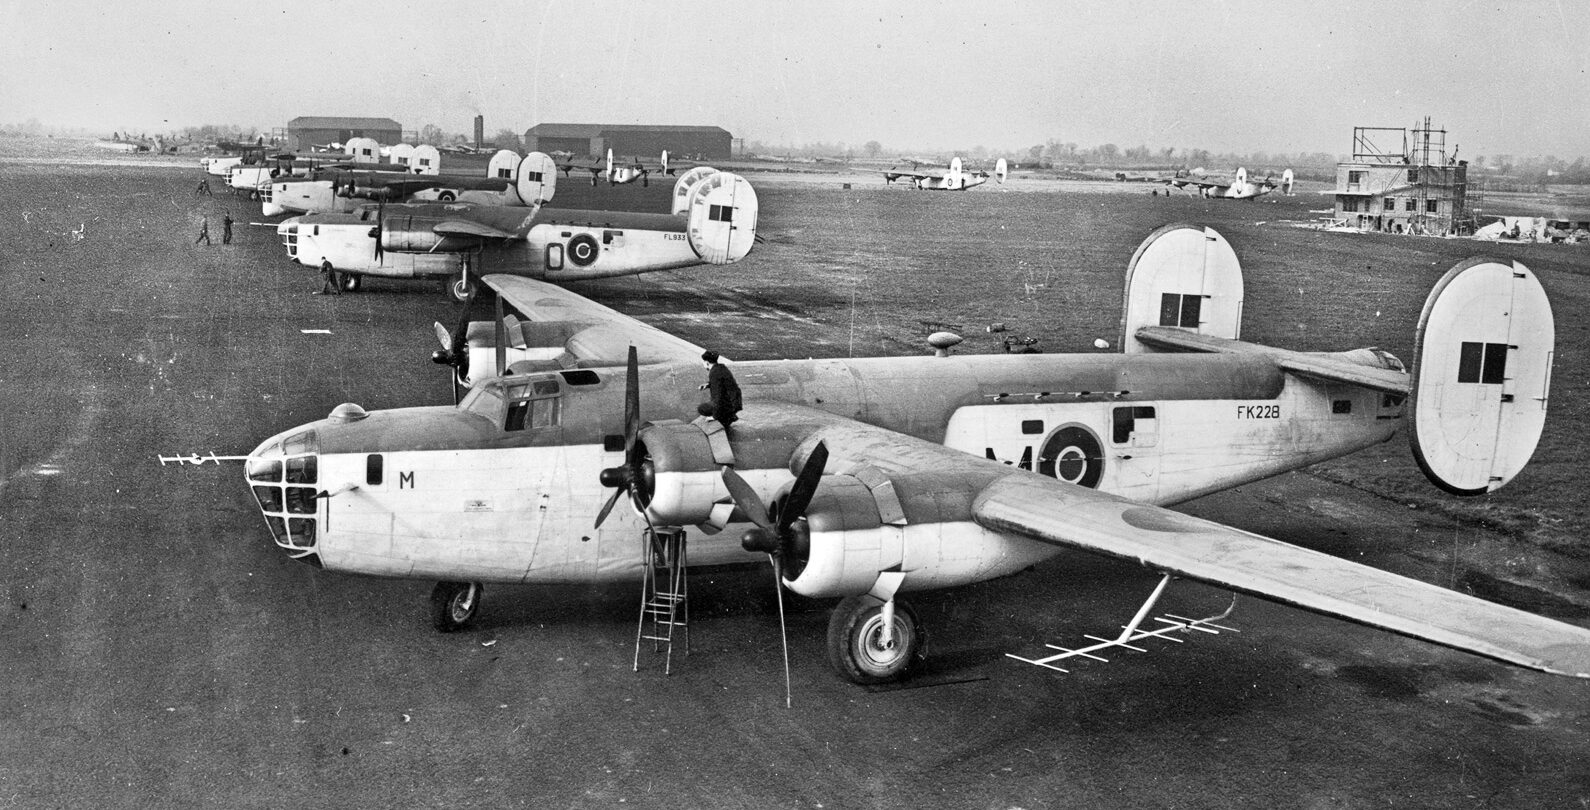 Consolidated B-24 Liberator bombers, modified to hunt Nazi U-boats and in service with Royal Air Force Coastal Command, sit ready to take off for anti-submarine patrols. 